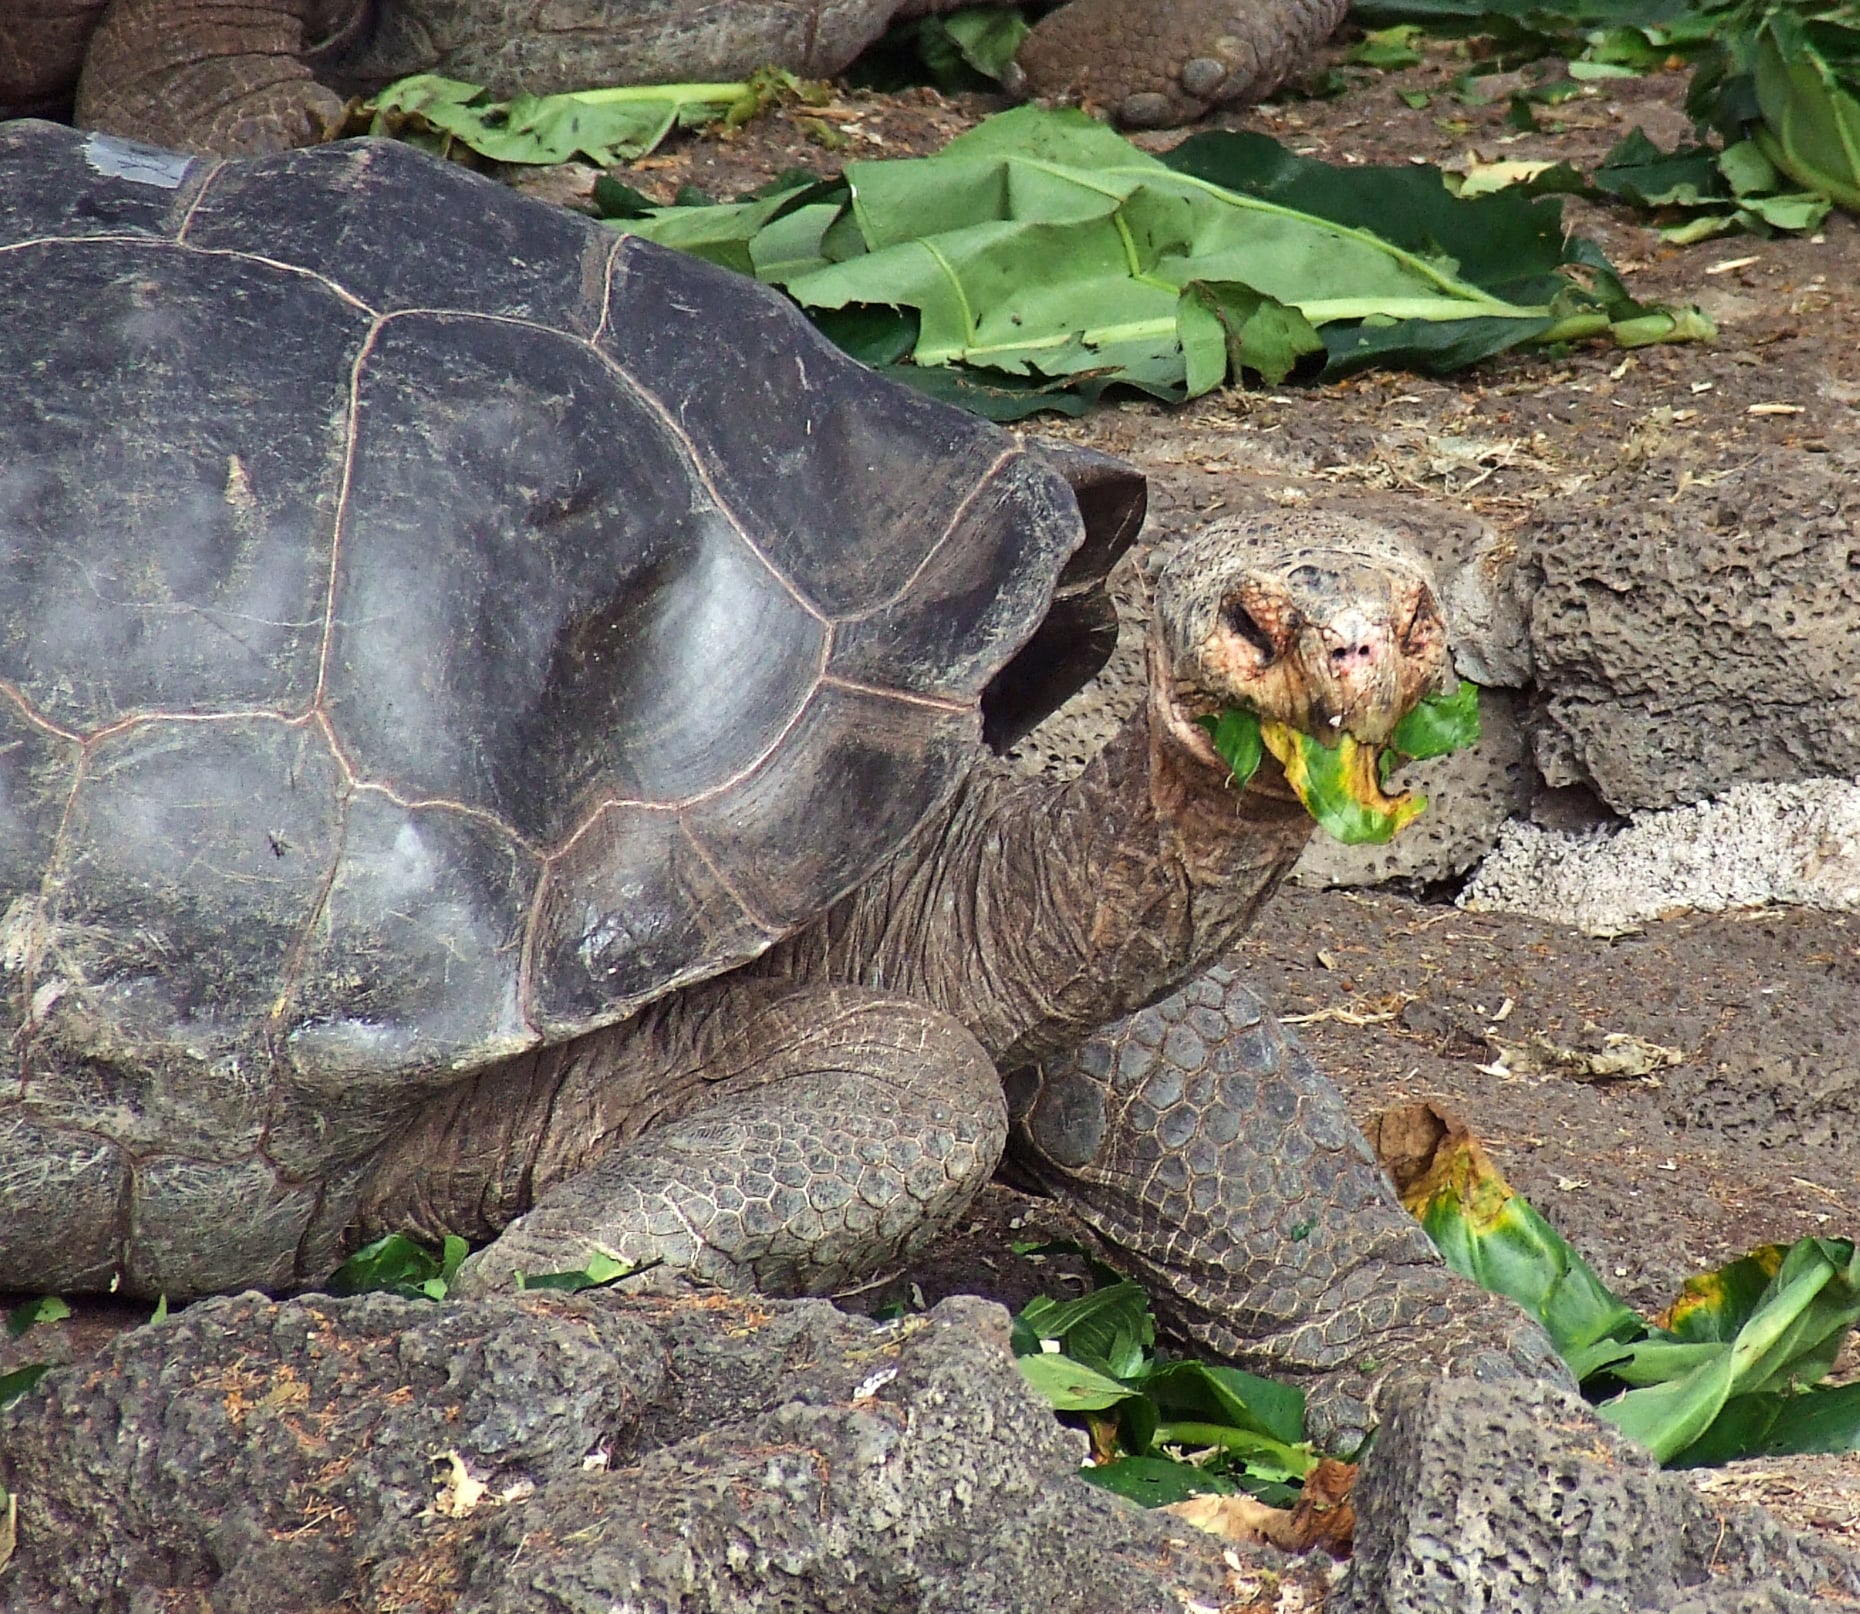 About The Galapagos Islands Giant Tortoise